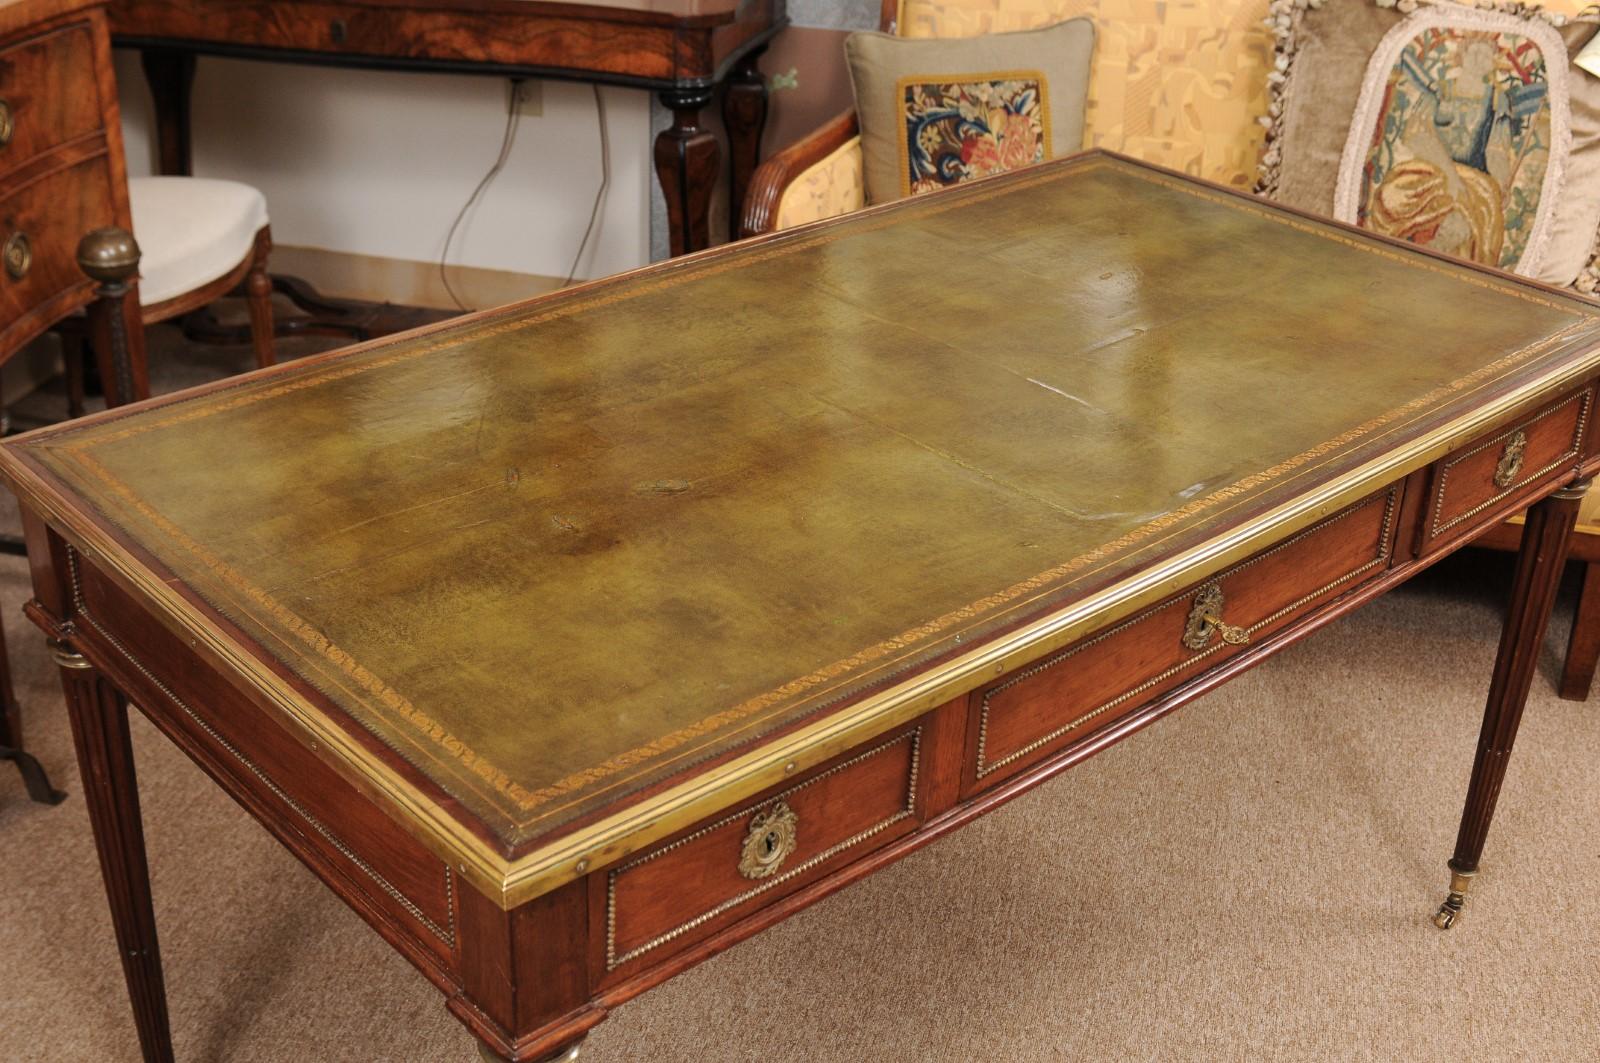 A 19th century French Louis XVI style bureau plat/desk with embossed green leather top, brass mounts, 3 drawers and turned fluted legs ending in caster feet.